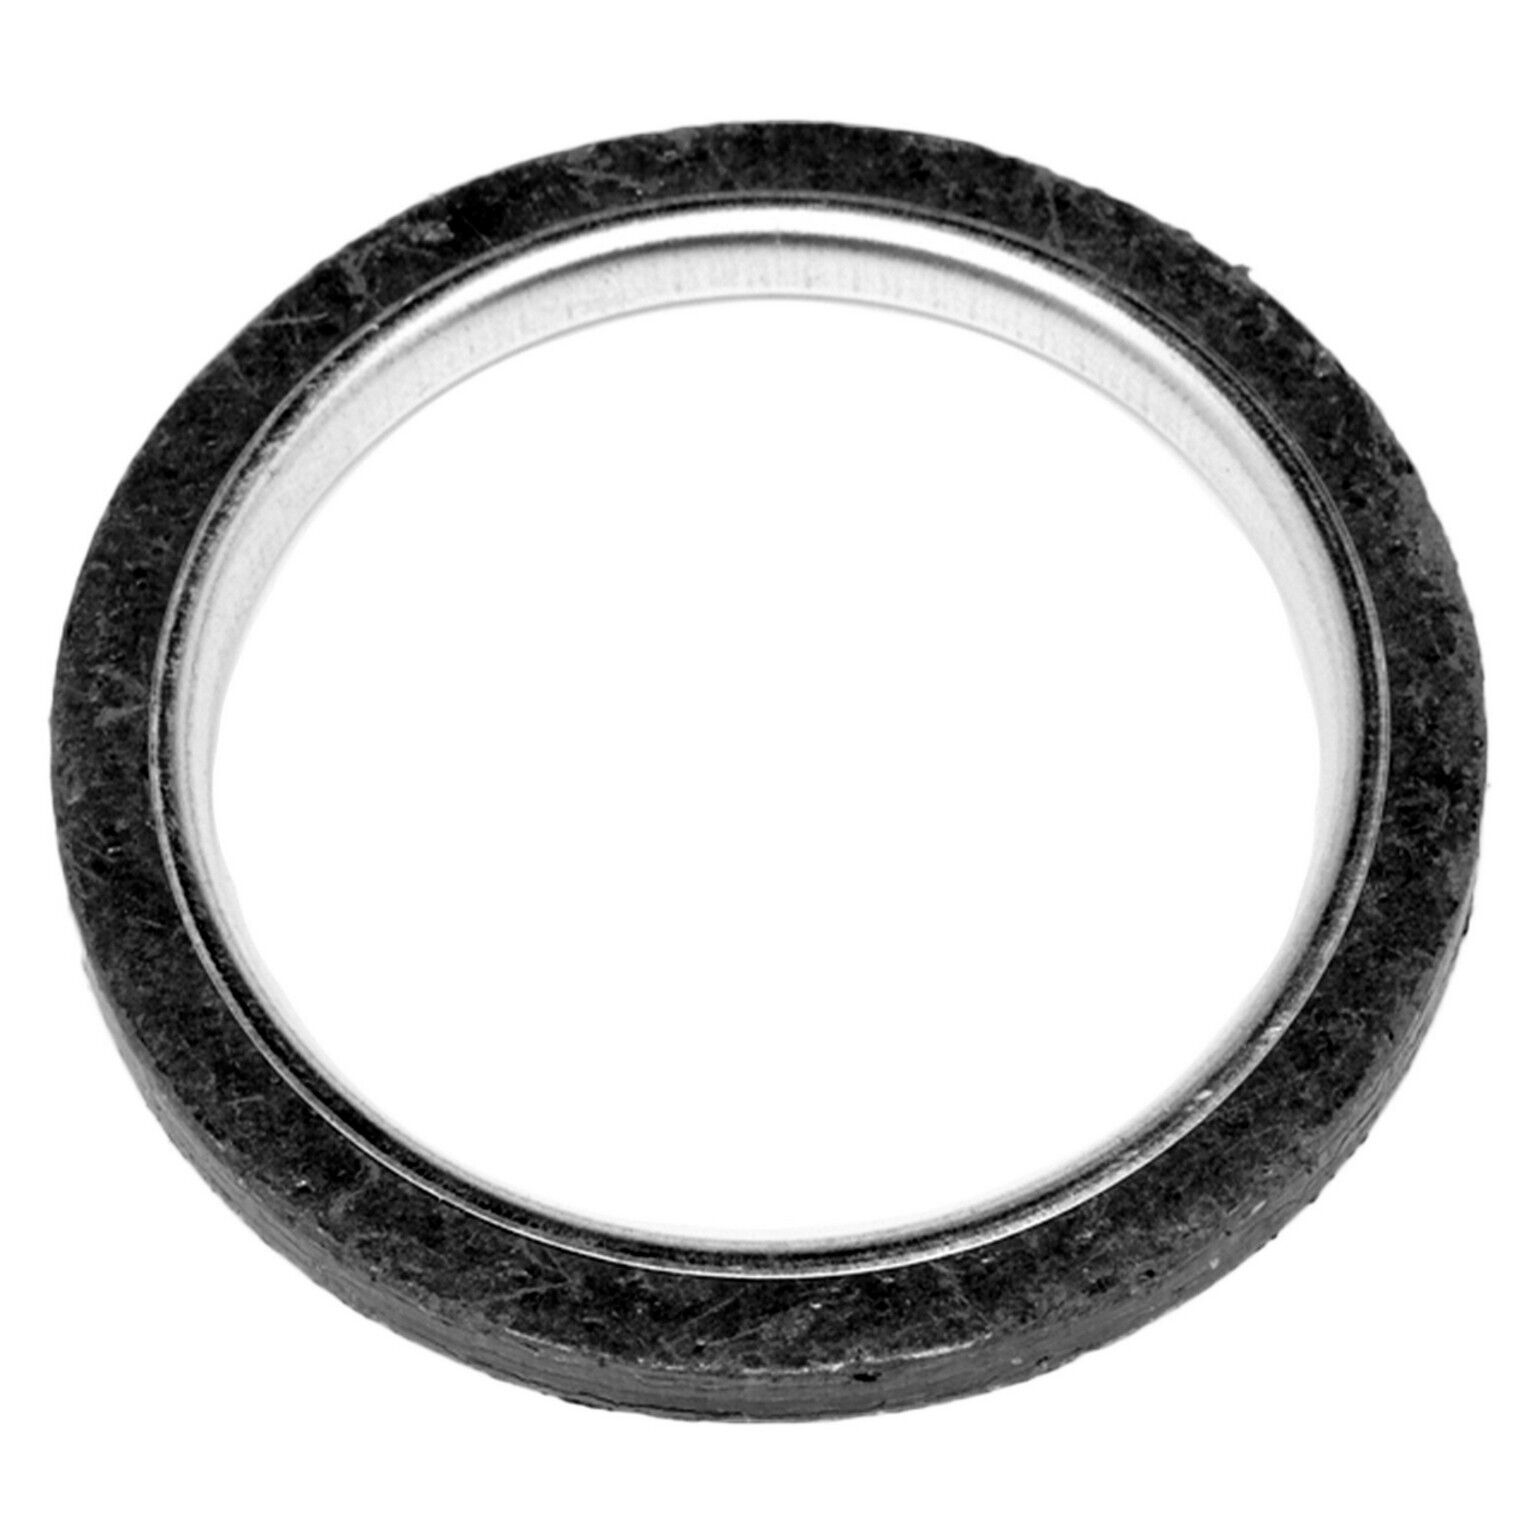 Exhaust Pipe Flange Gasket for Versa, Versa Note, Sentra, 200SX+More (31396)